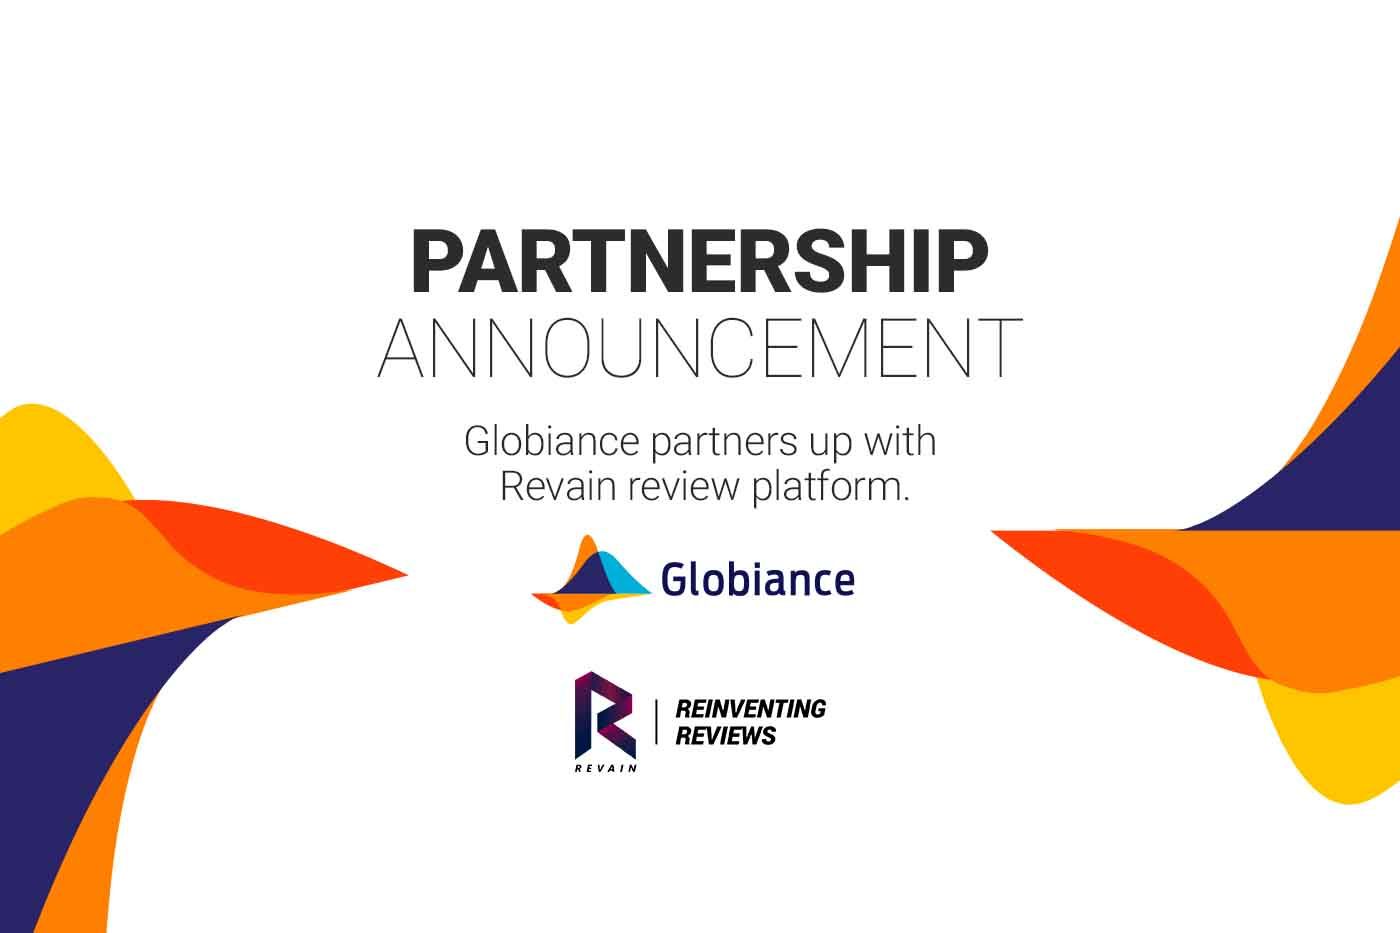 Article Revain announces a partnership with financial services company Globiance